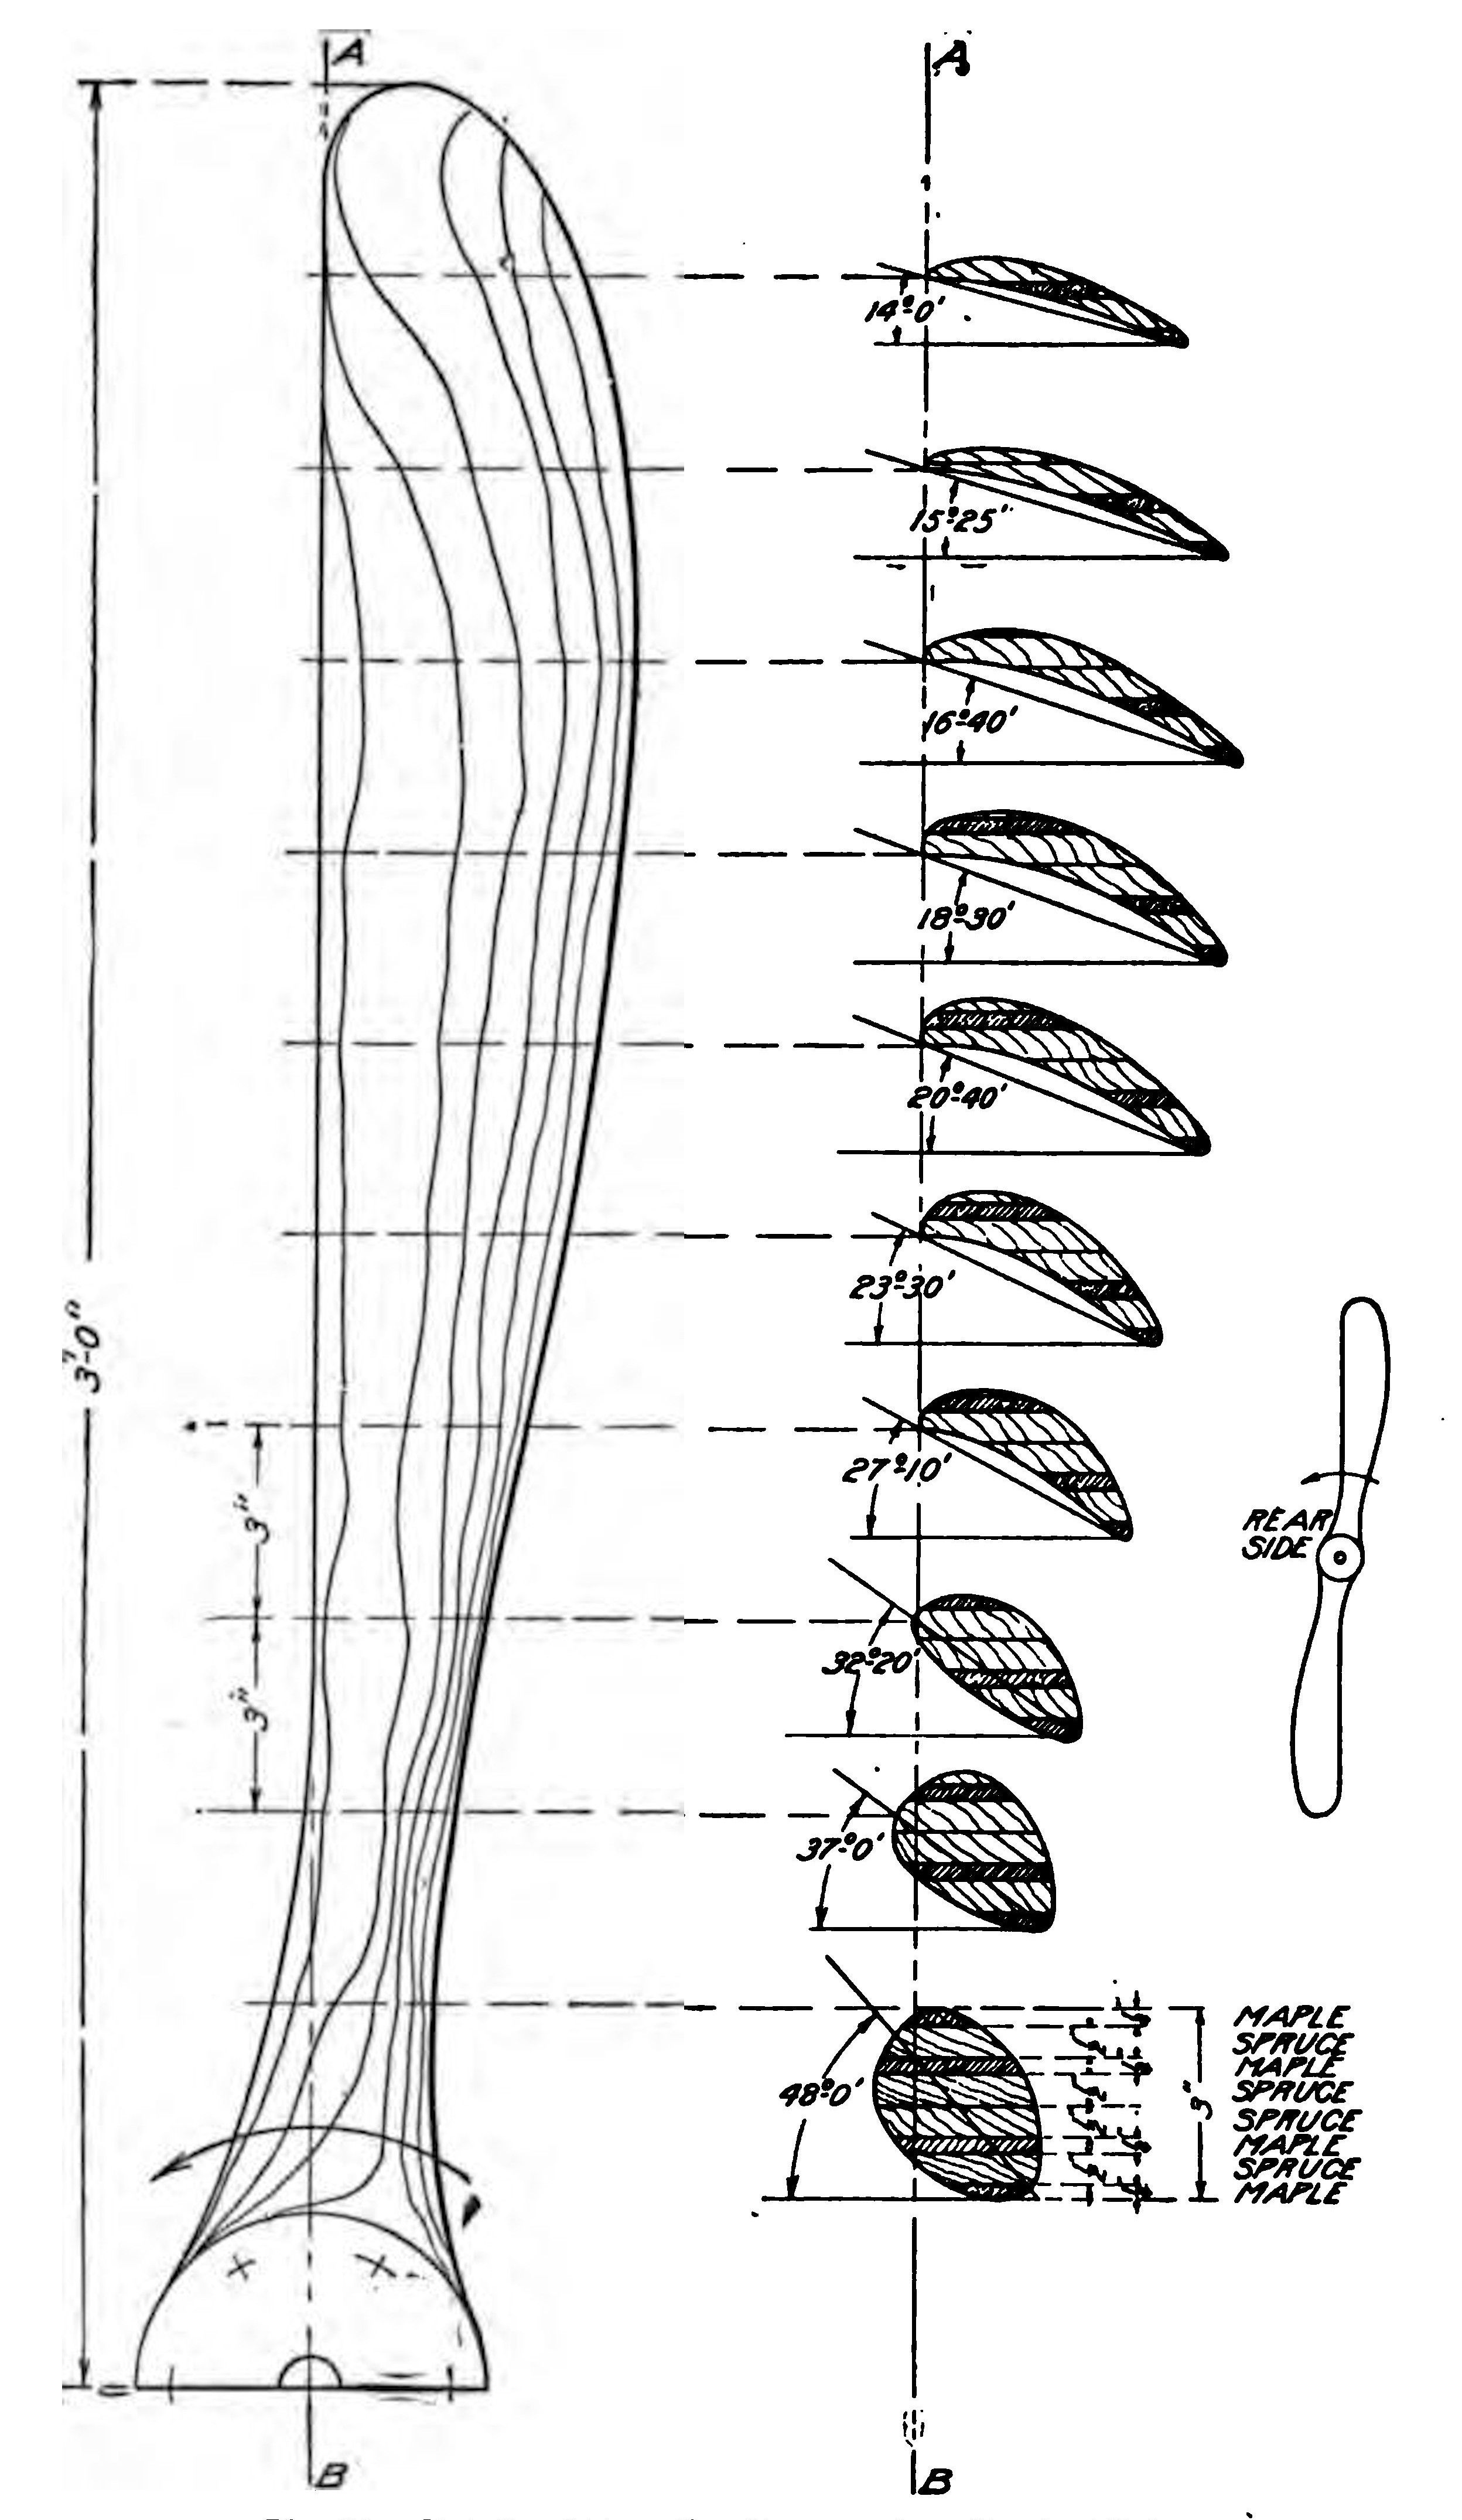 Fig. 21. Details of Propeller Construction, Curtiss Biplane